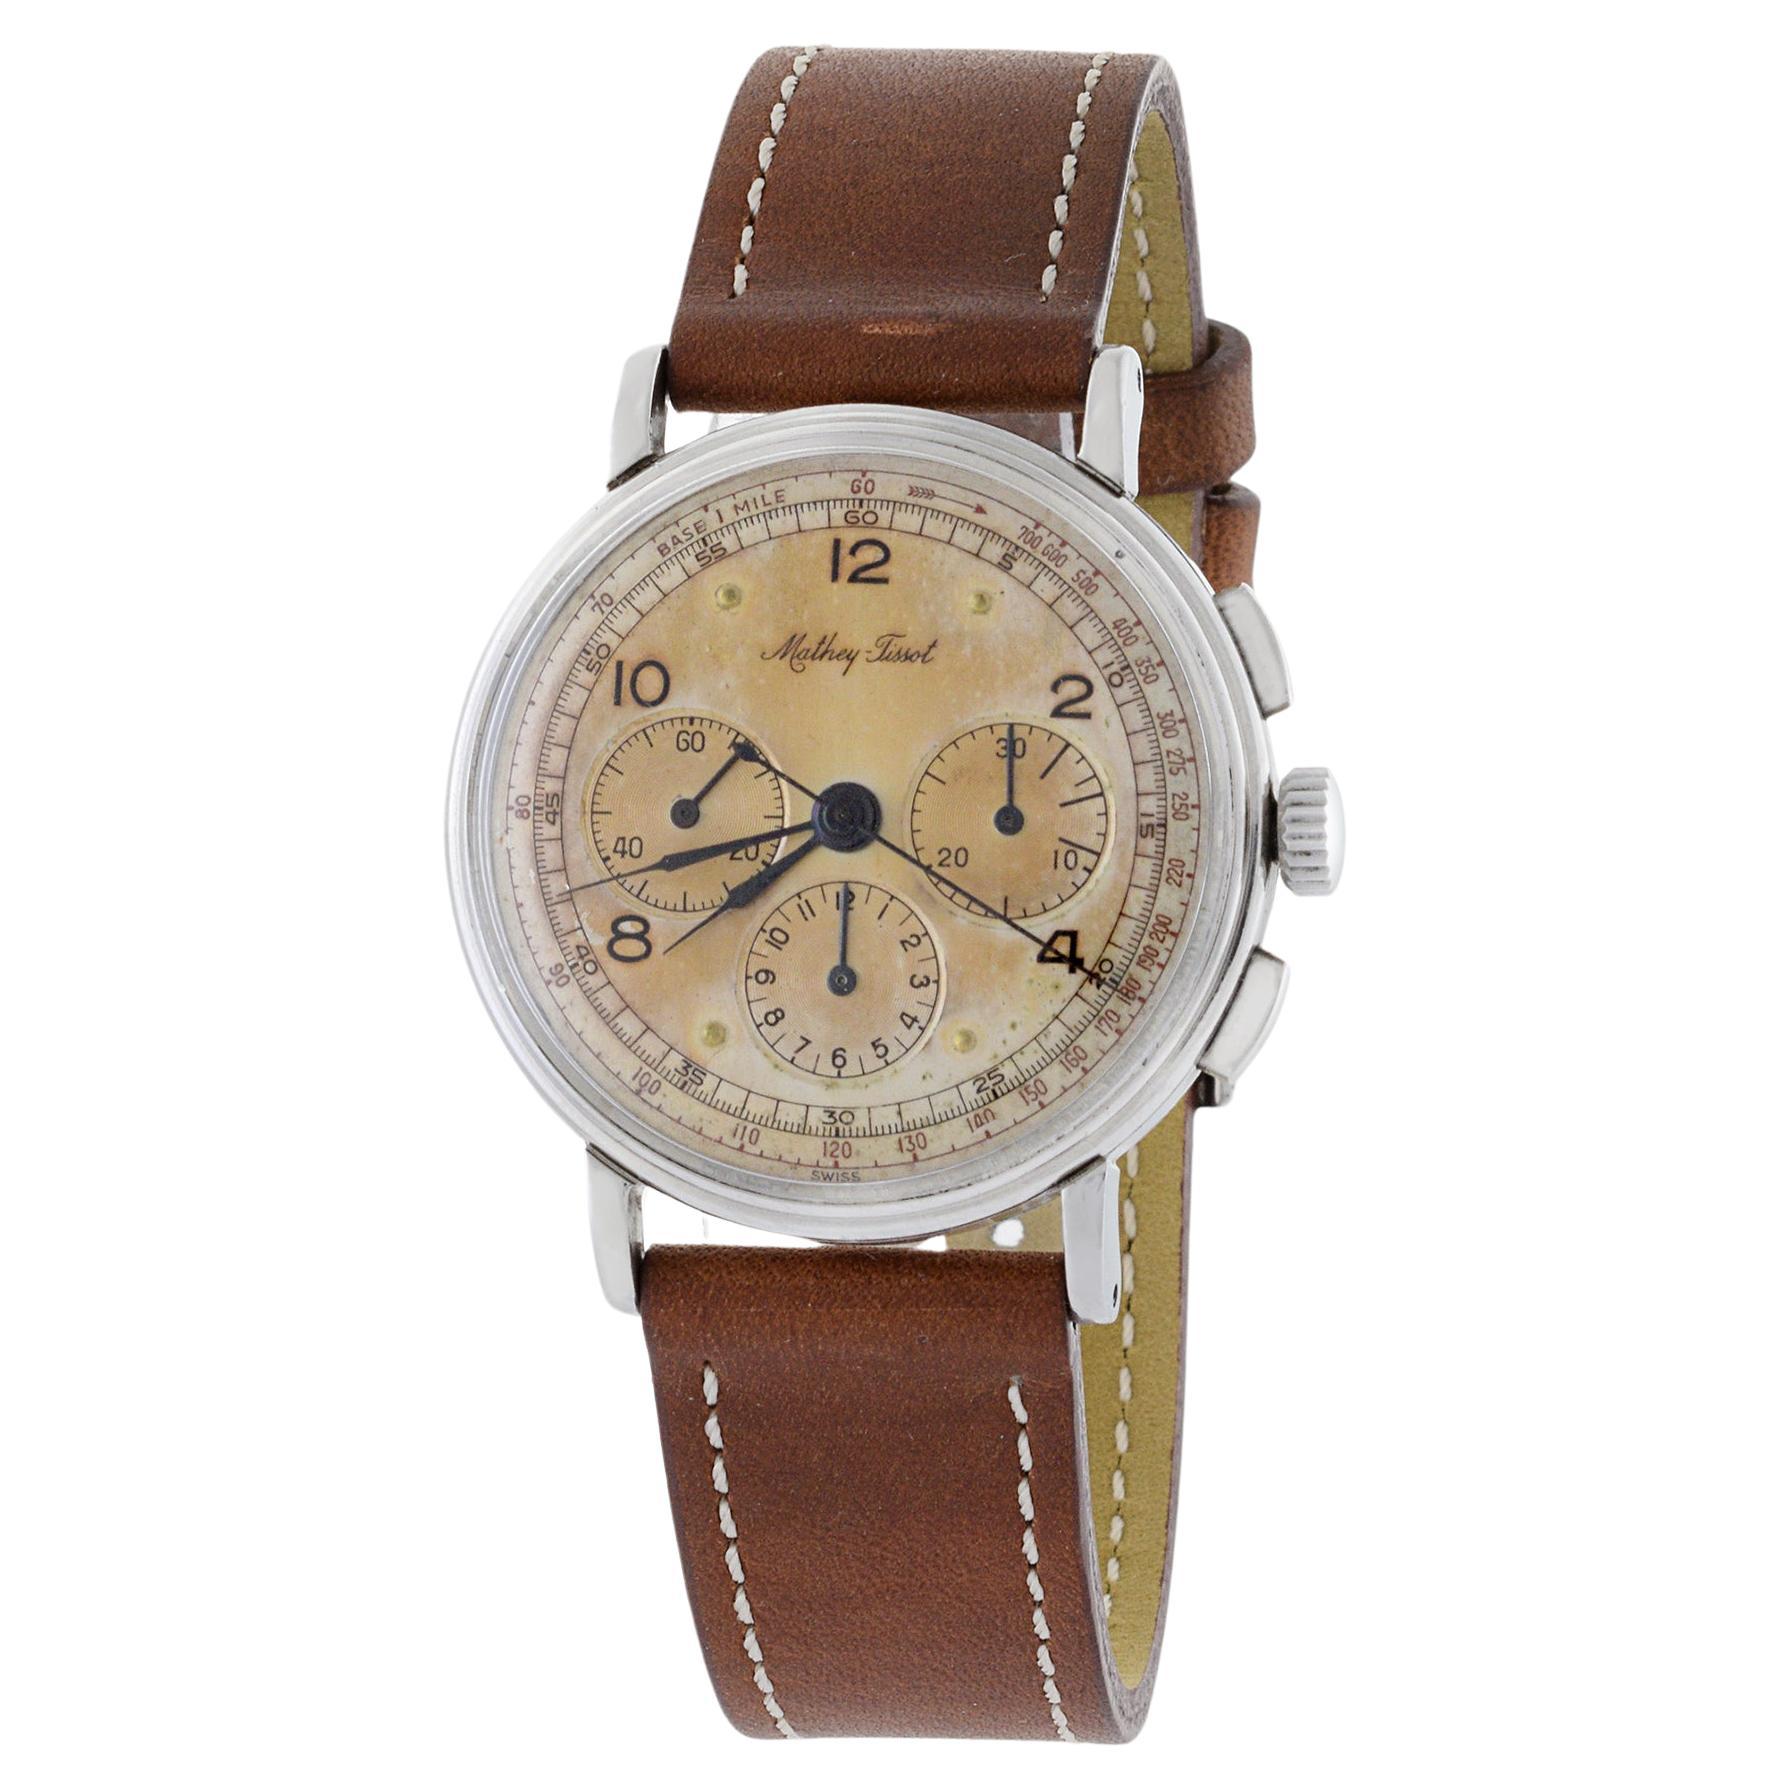 Mathey Tissot 1940's Stainless Steel Chronograph For Sale